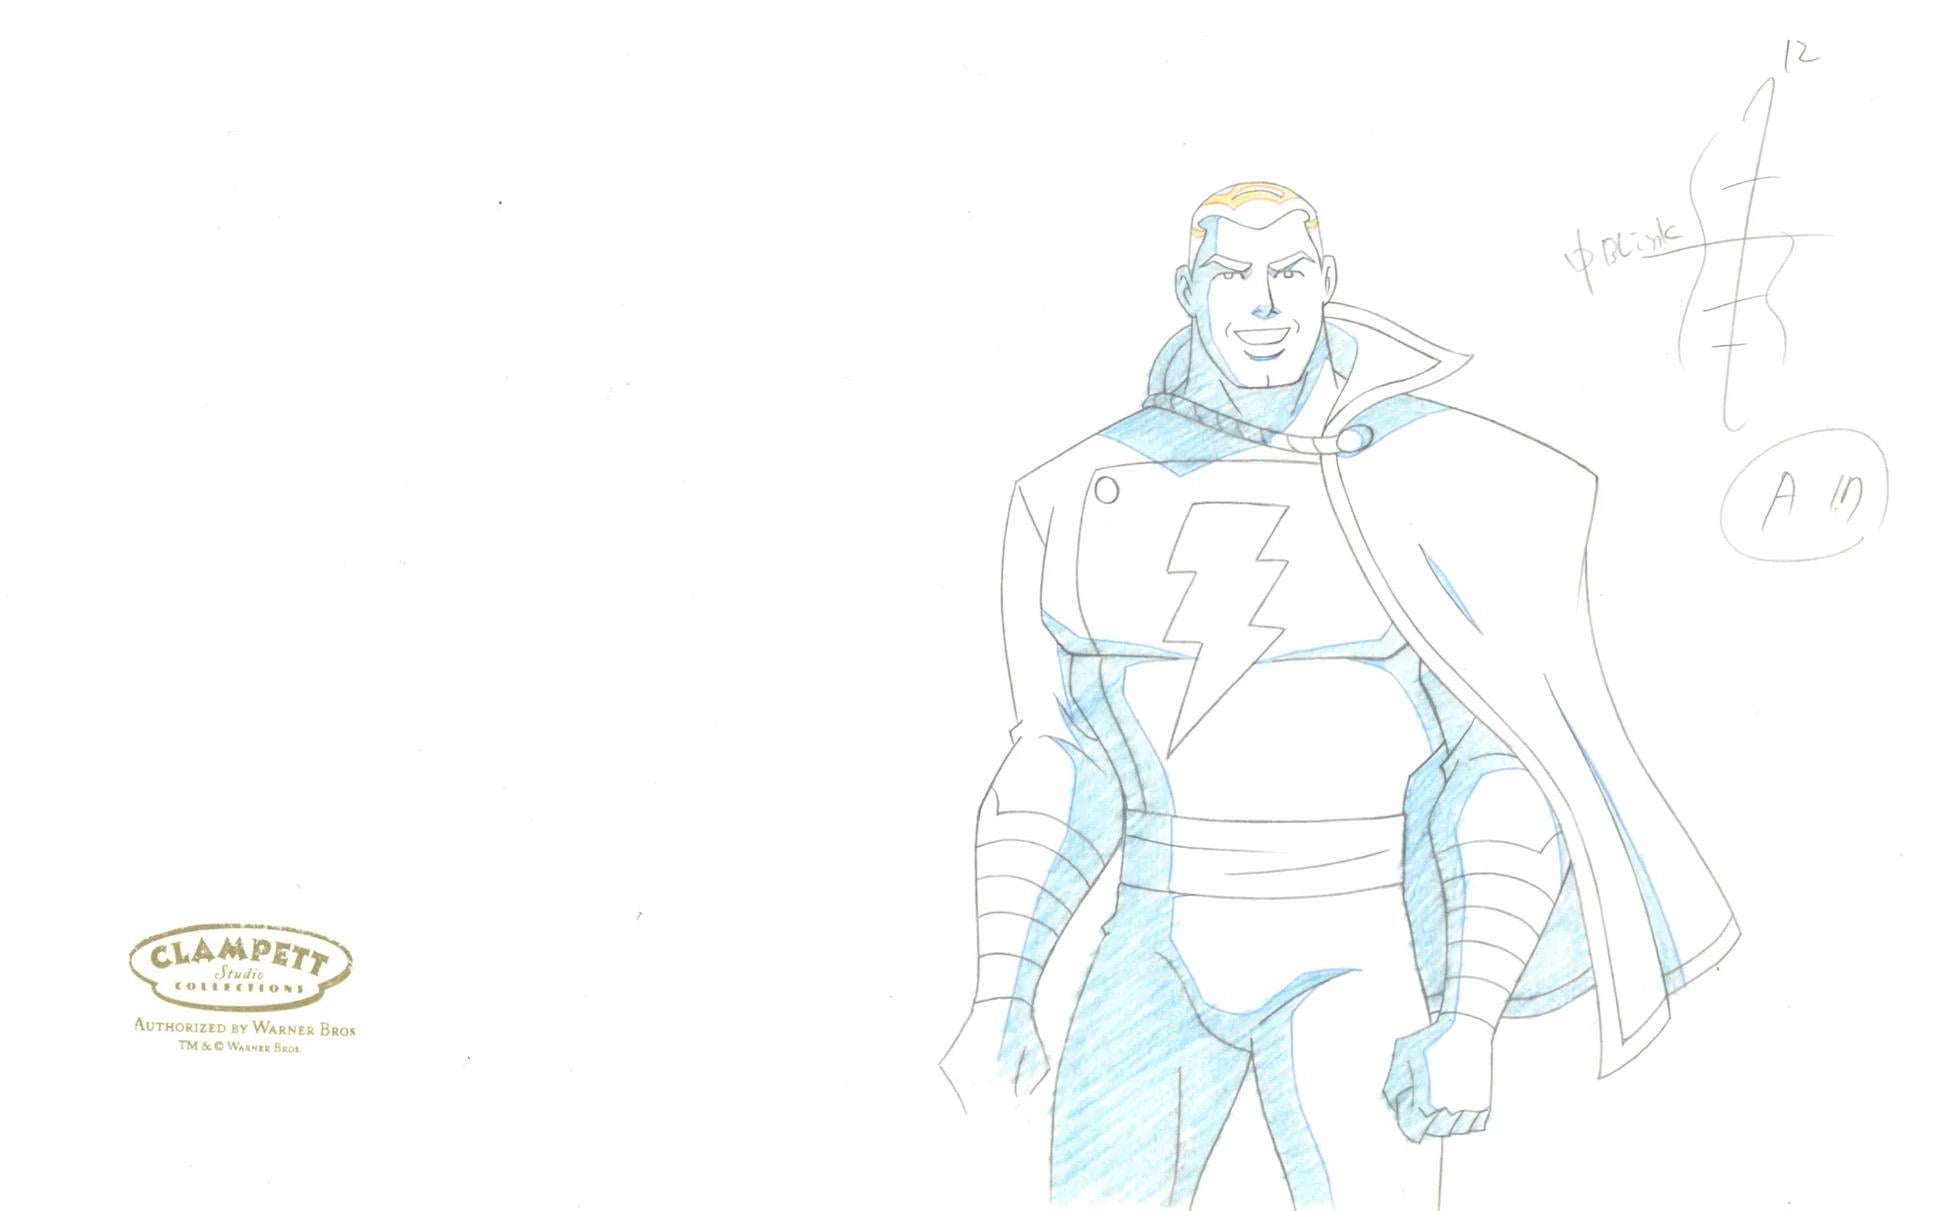 Justice League Unlimited Original Production Drawing: Captain Marvel - Art by Warner Bros. Studio Artists